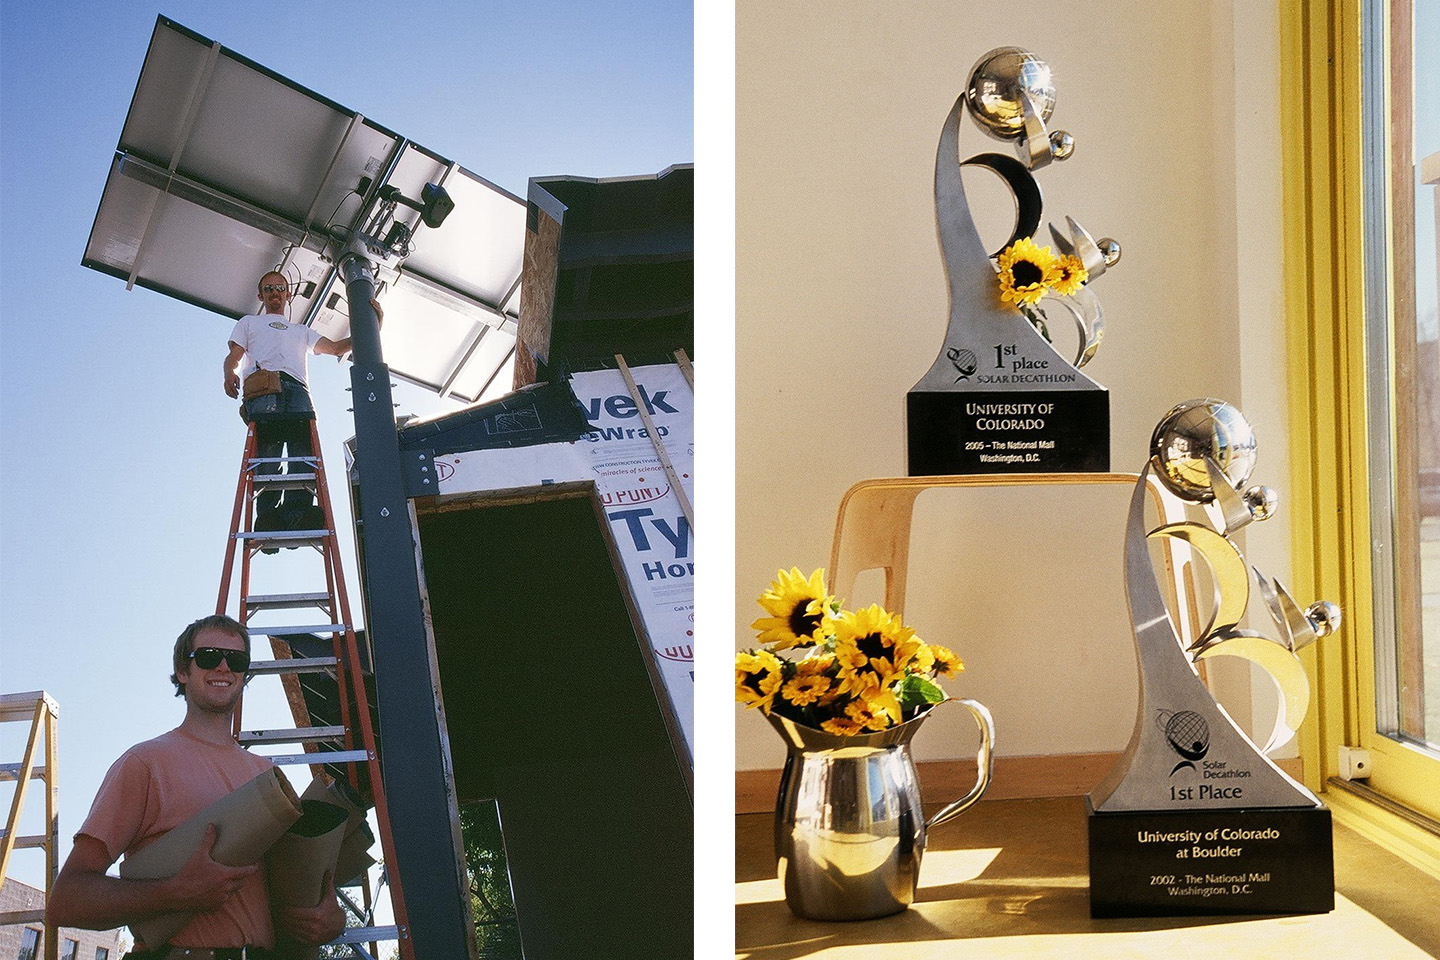 On the left, two students construct the Solar Decathlon home, and on the right are two first-prize awards for the Solar Decathlon.